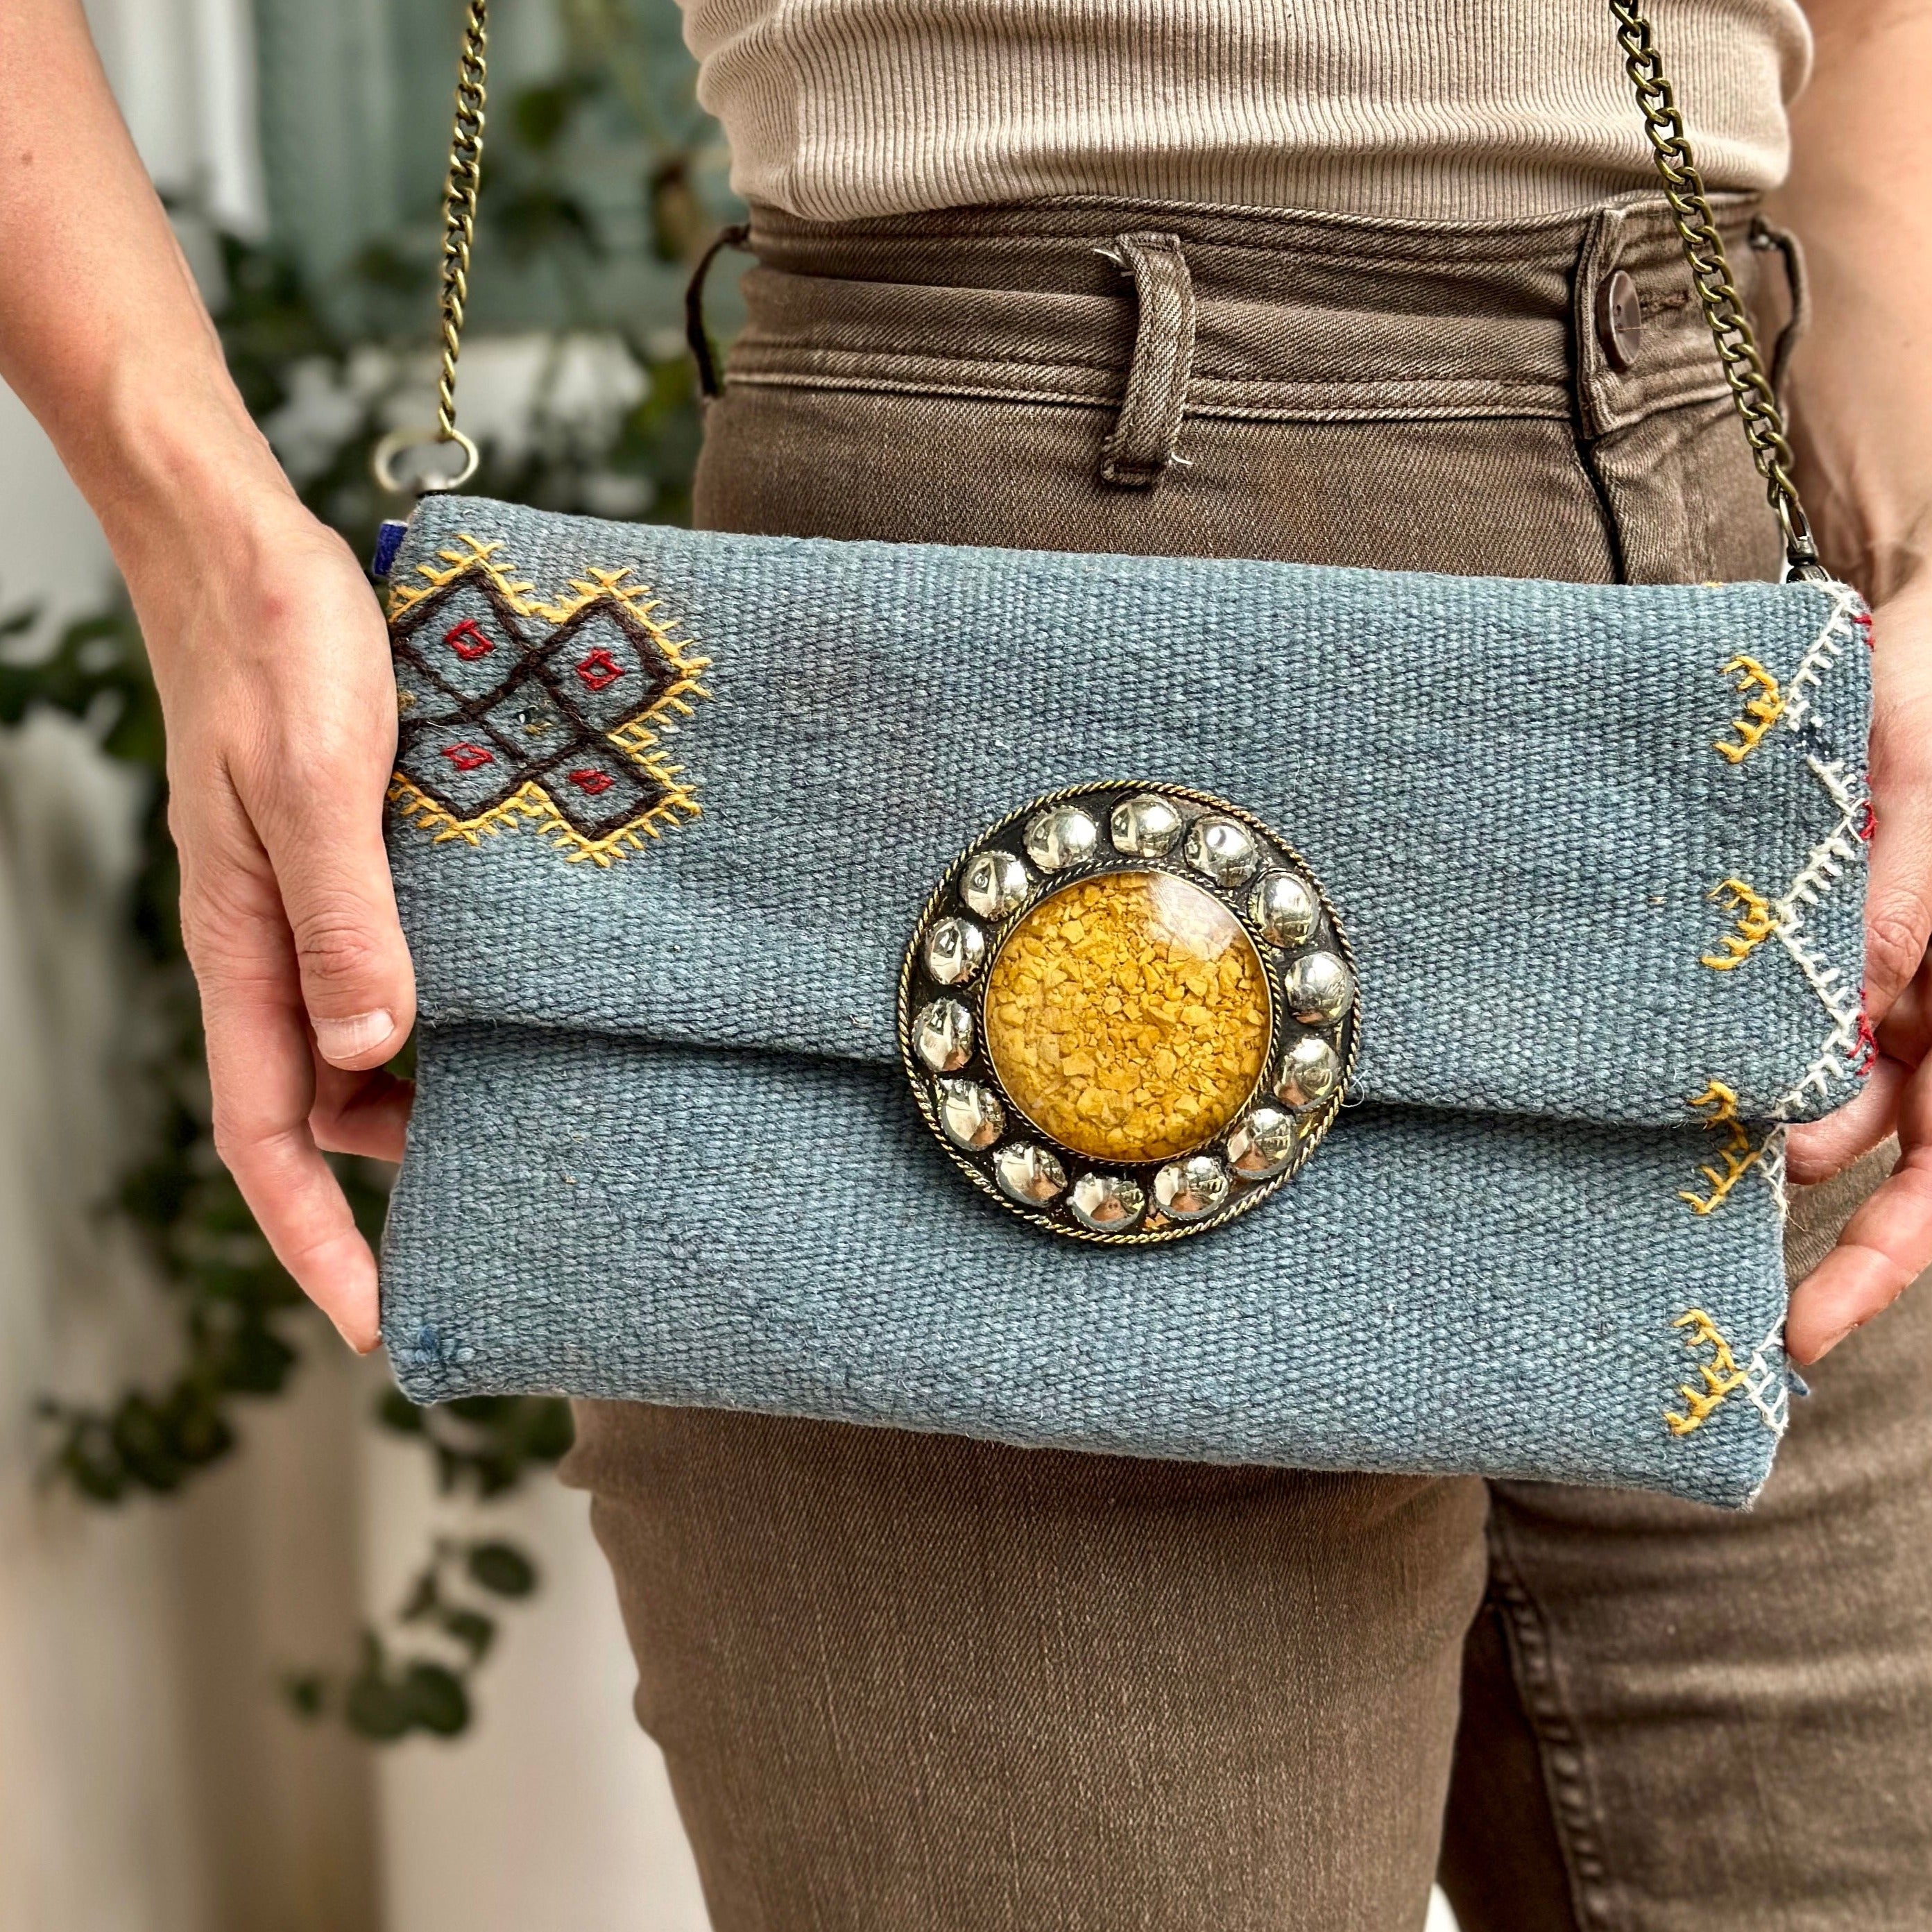 Chams Upcycled Clutch